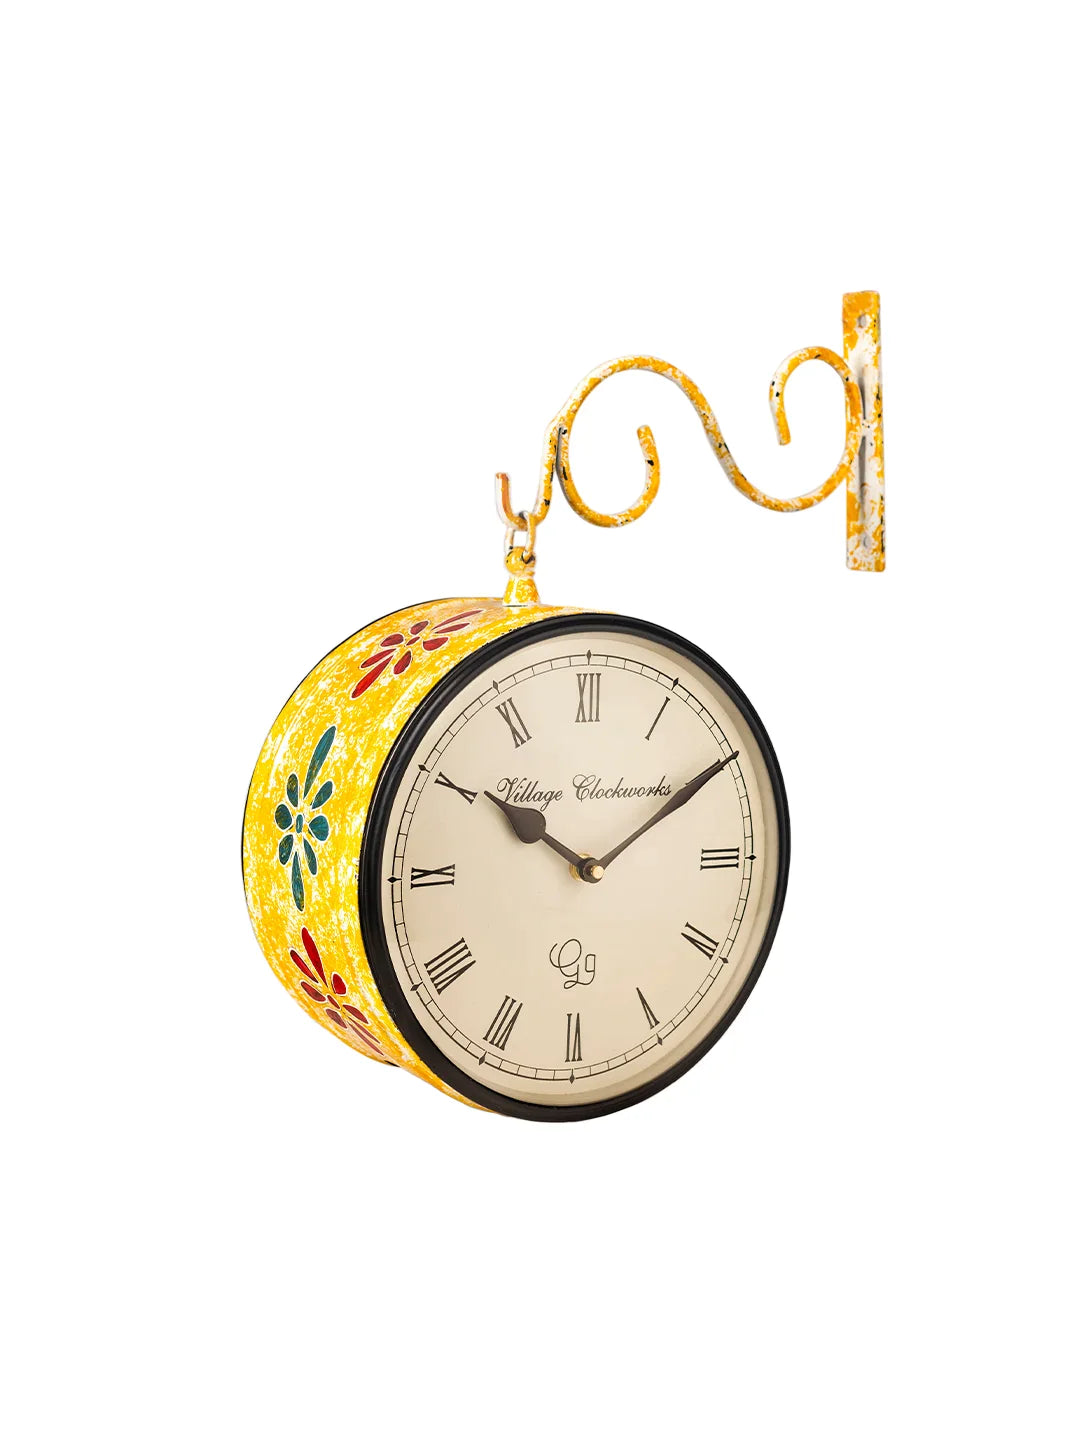 Metal Round Station Clock Handpainted Yellow 8 Inches Wall Clock